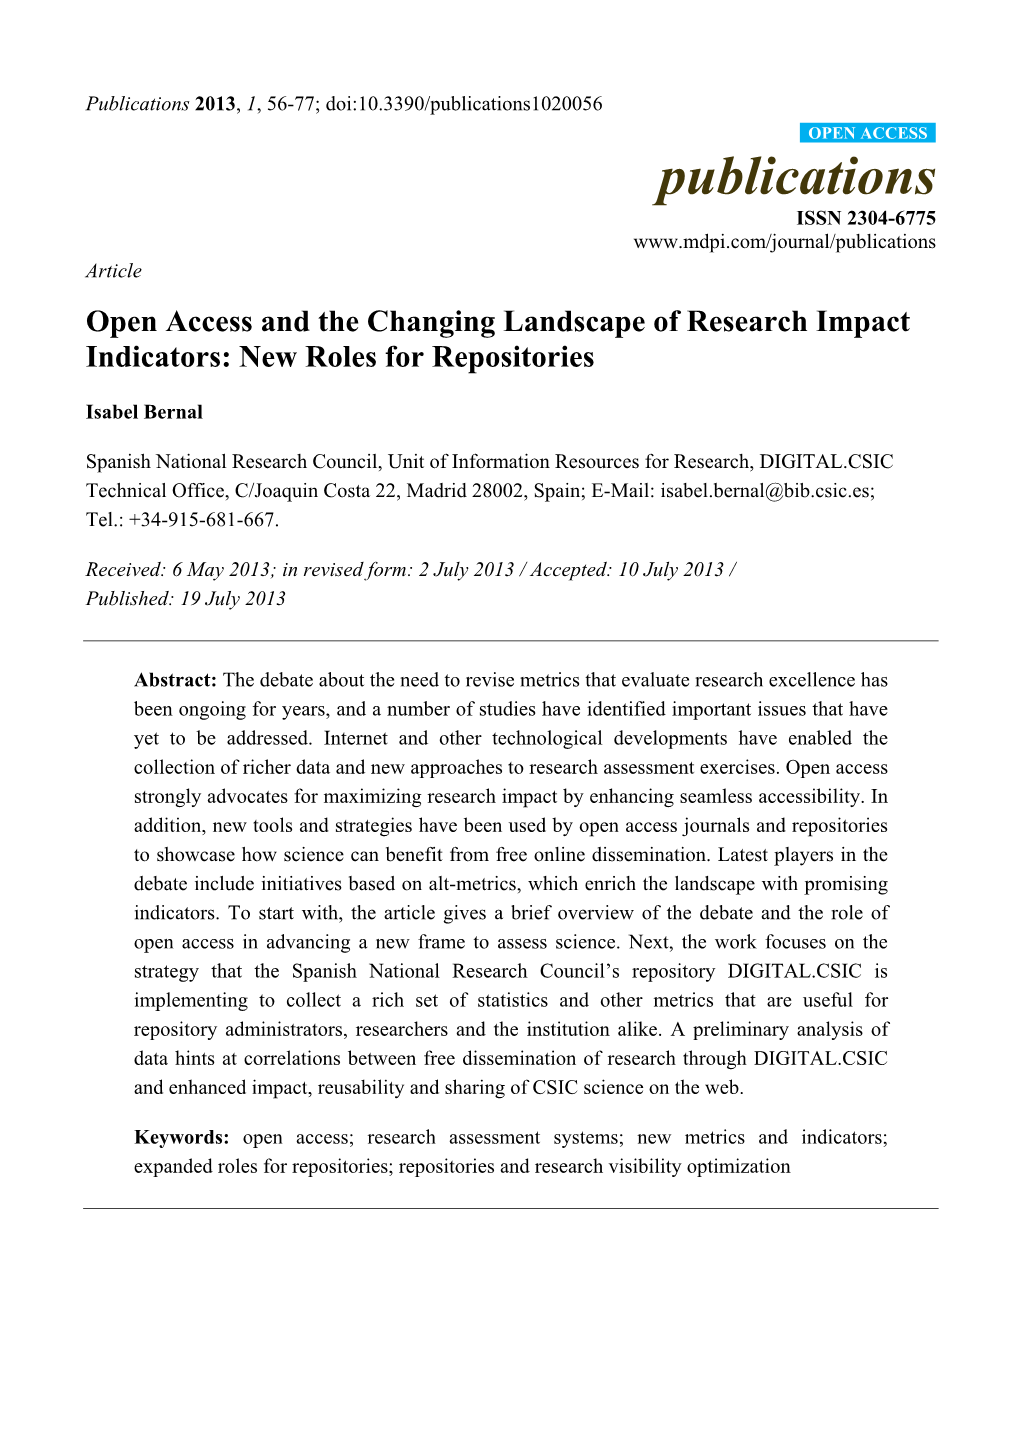 Open Access and the Changing Landscape of Research Impact Indicators: New Roles for Repositories